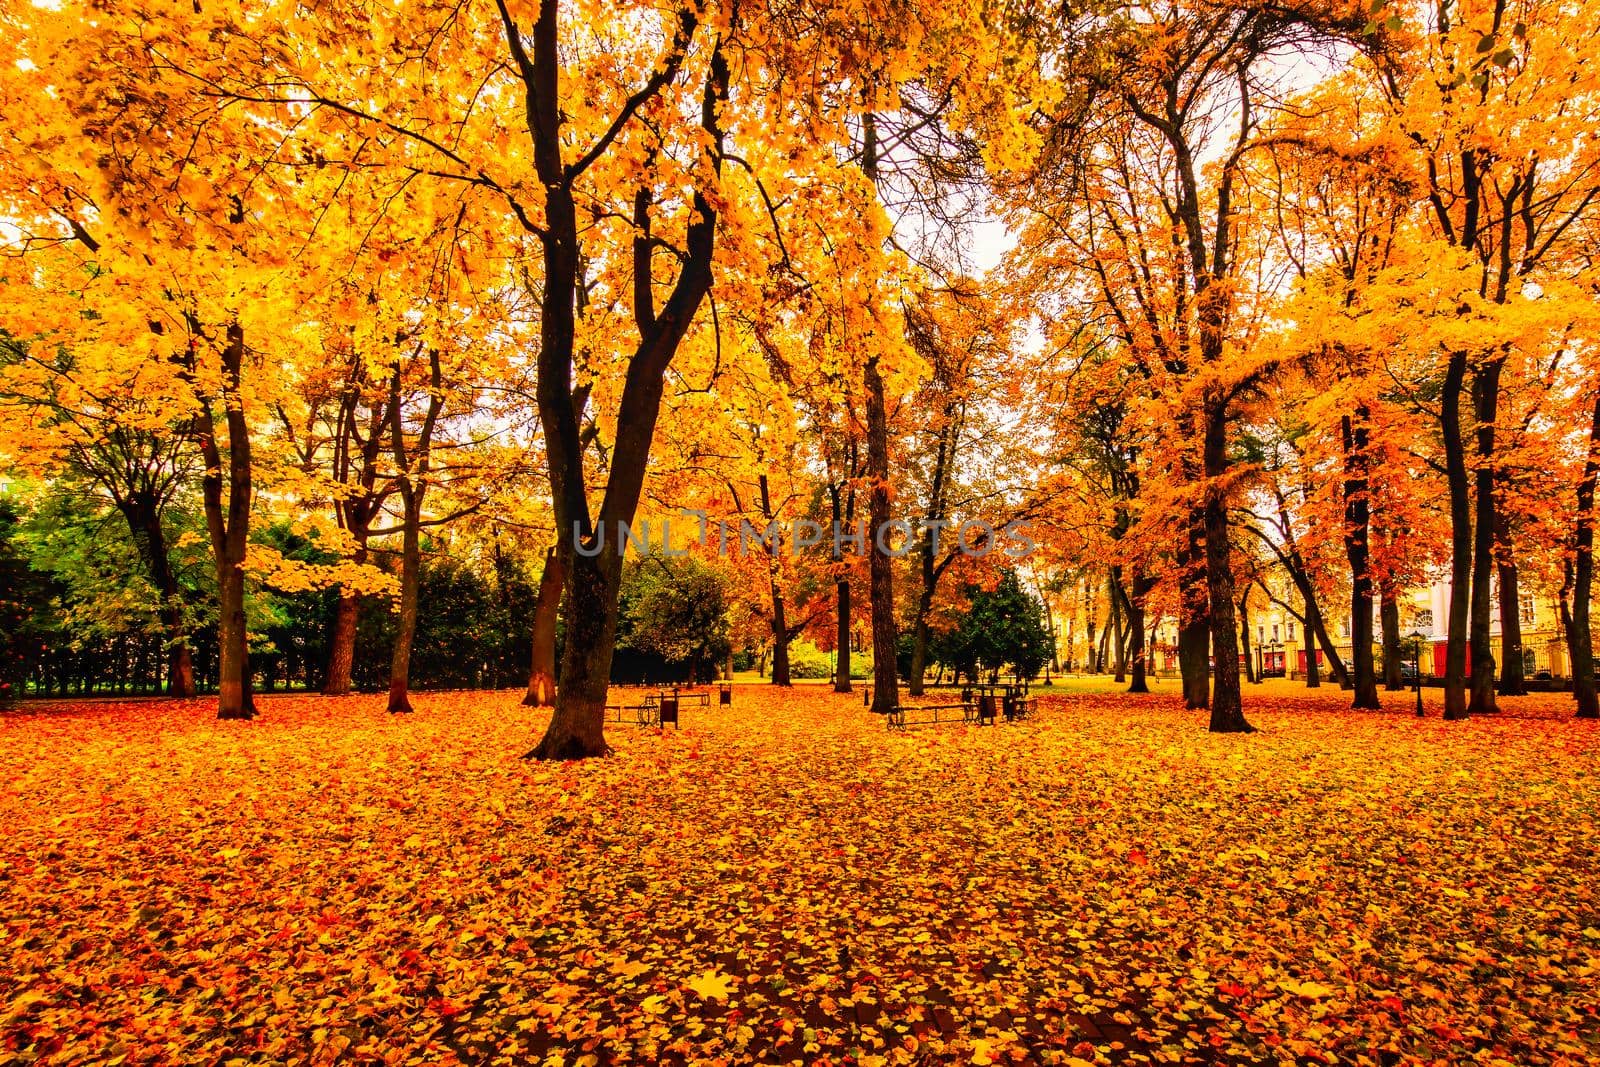 Golden autumn in a city park with trees and fallen yellow leaves on a cloudy day.